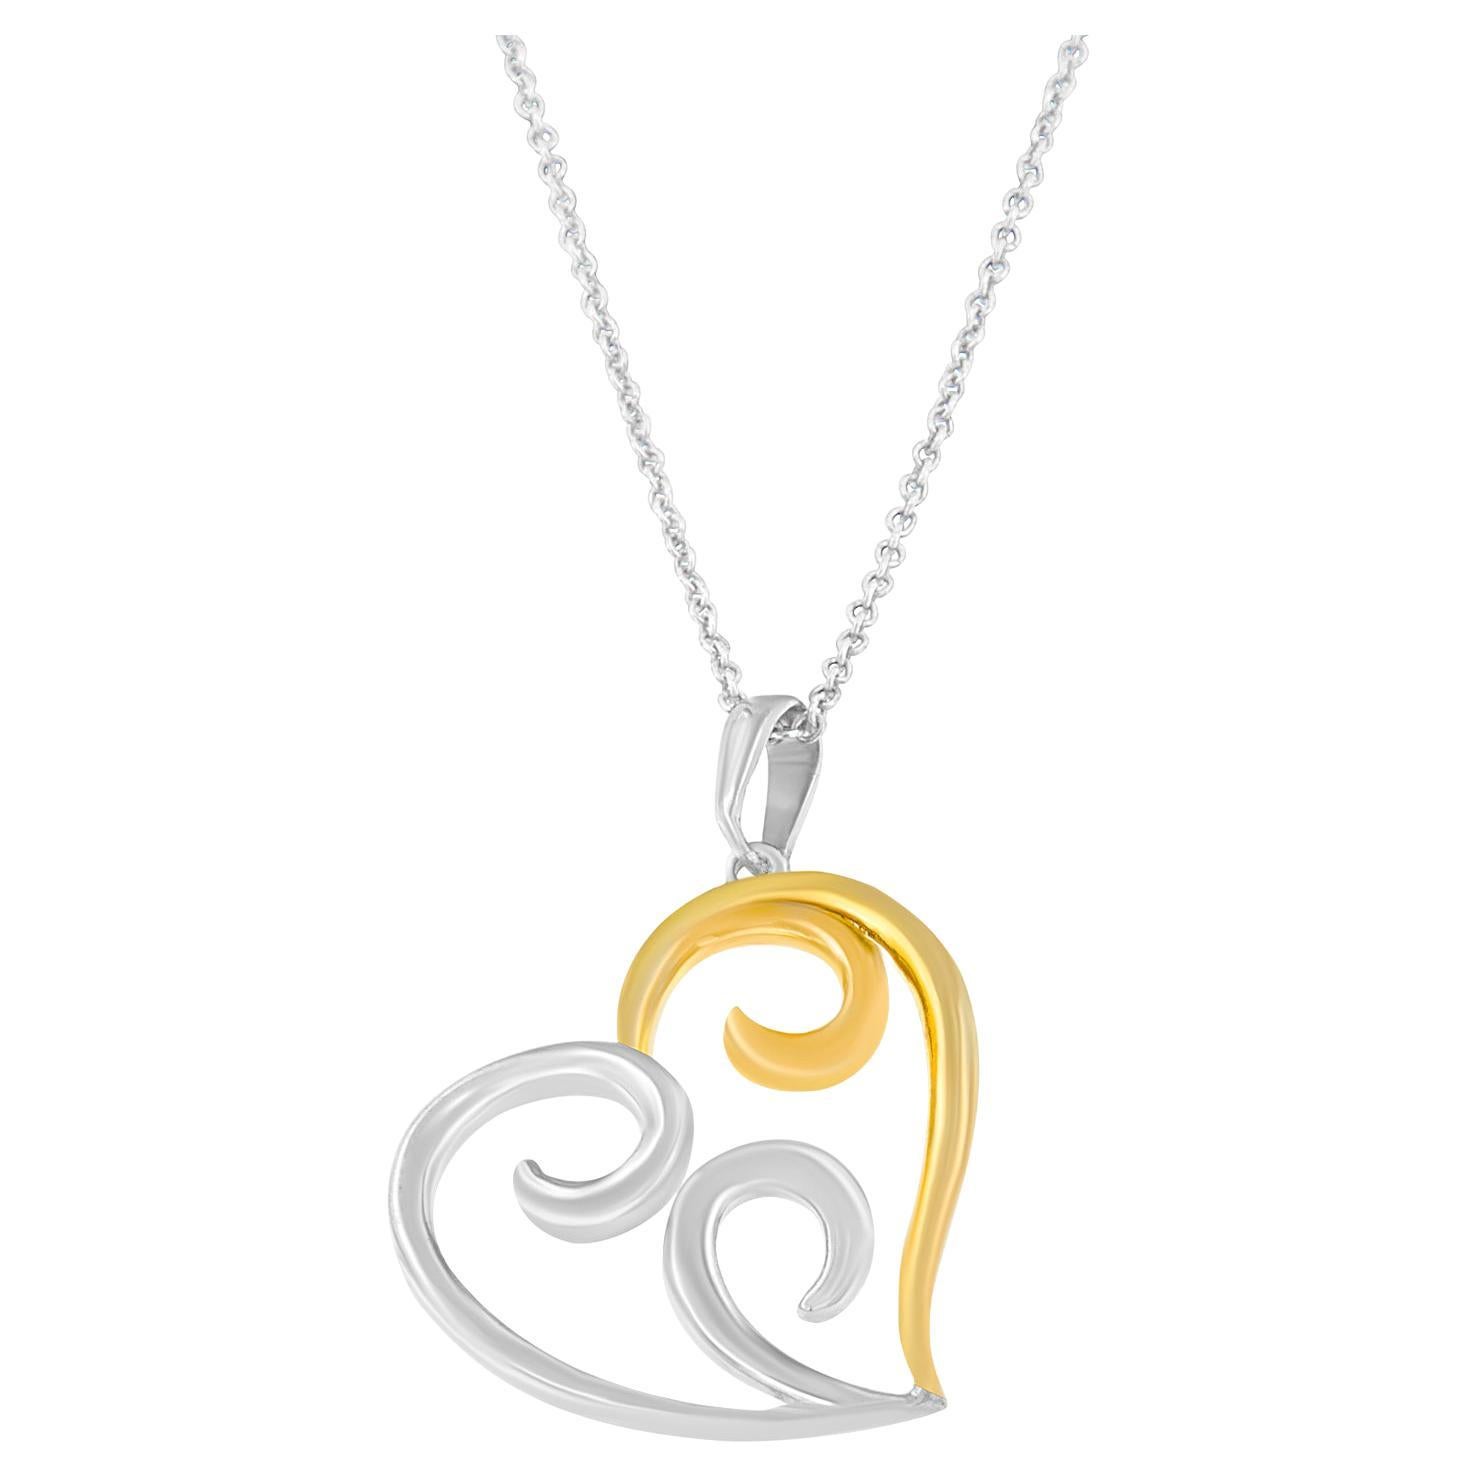 Yellow Plated and Two-Toned Sterling Silver Heart Pendant Necklace